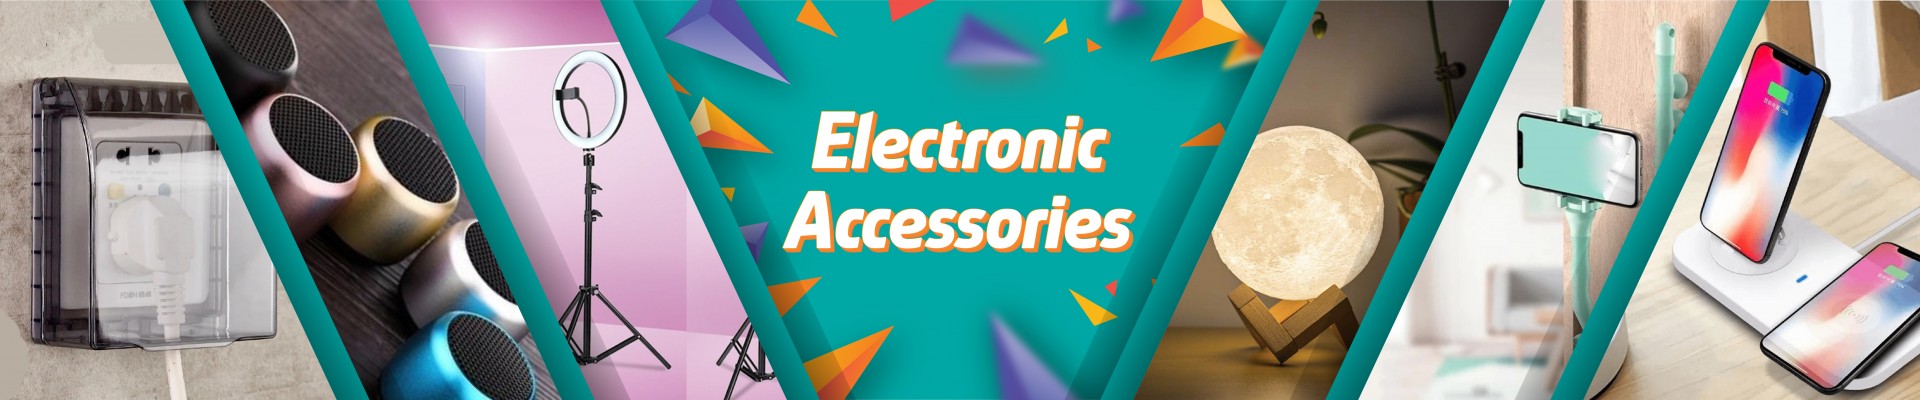 Electronic Accessories - Buy Electronic Accessories in Pakistan